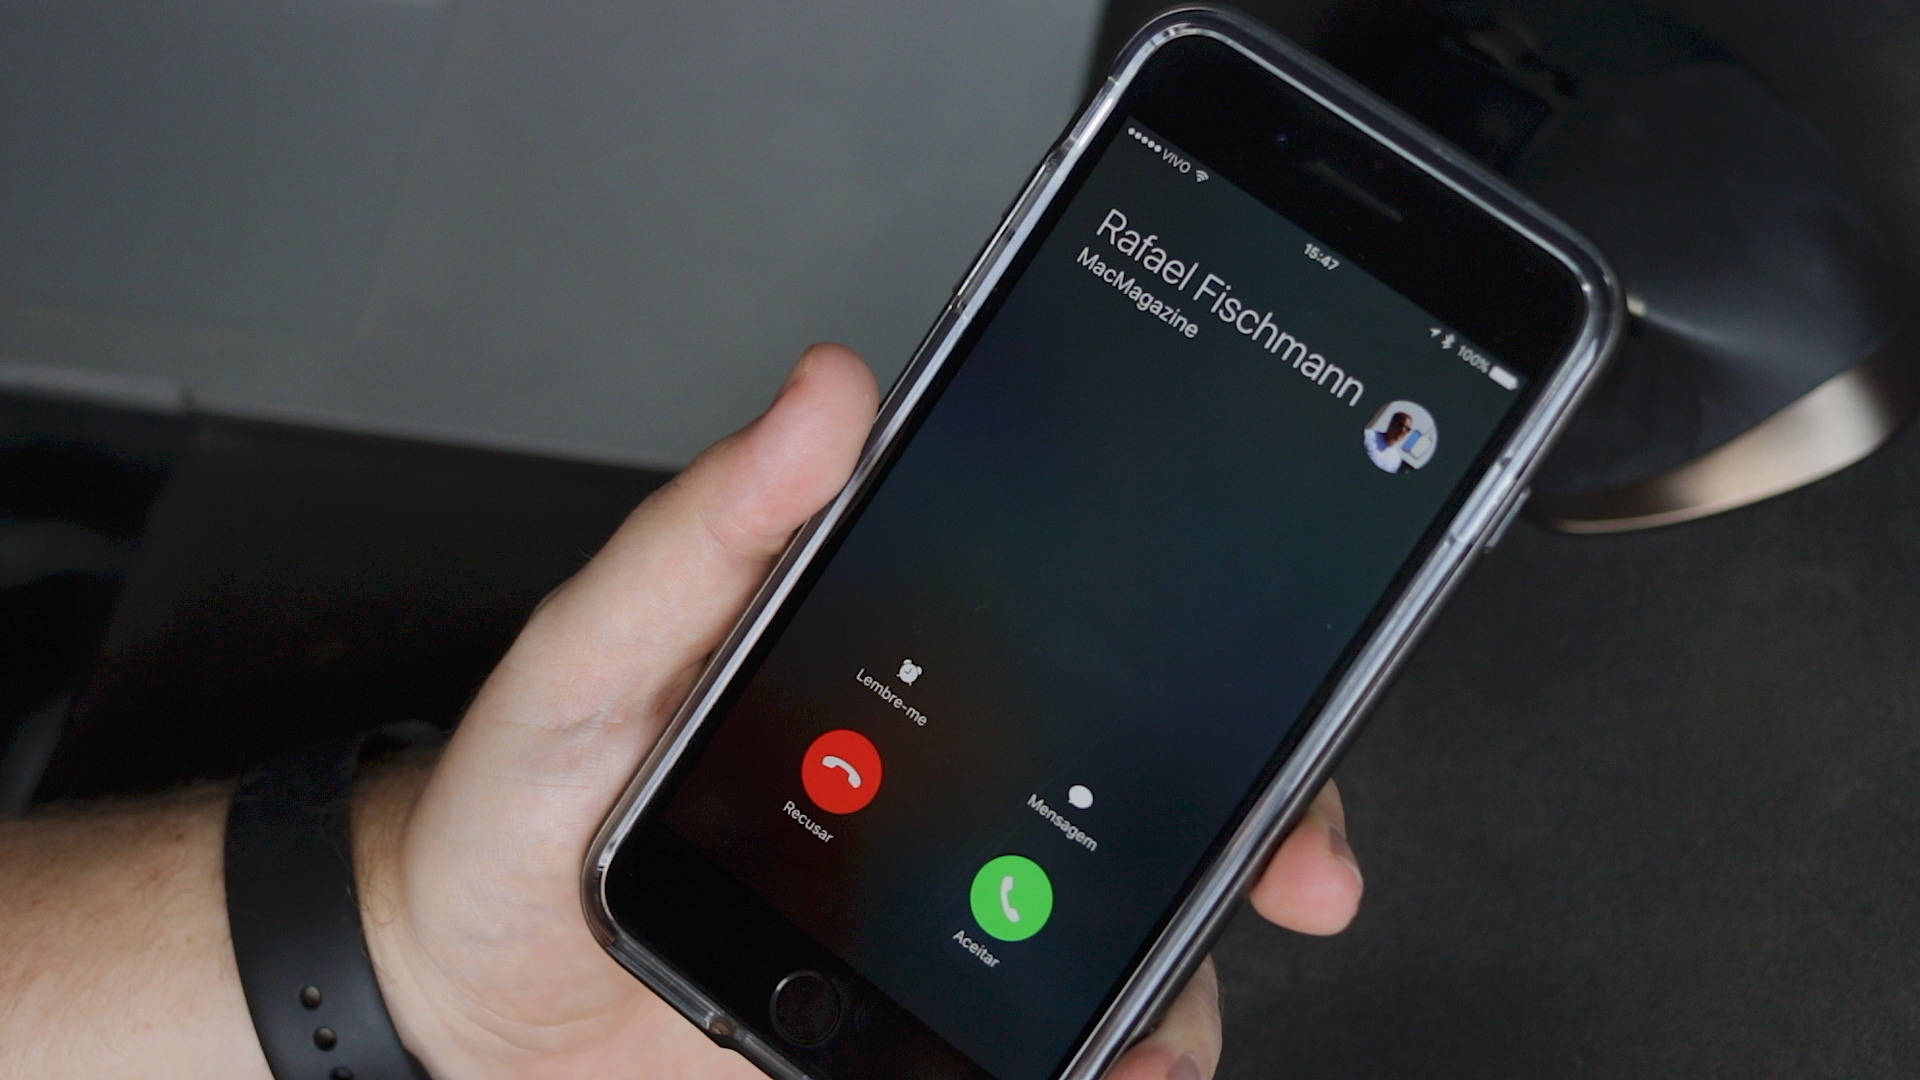 Video: making your iPhone announce who is calling